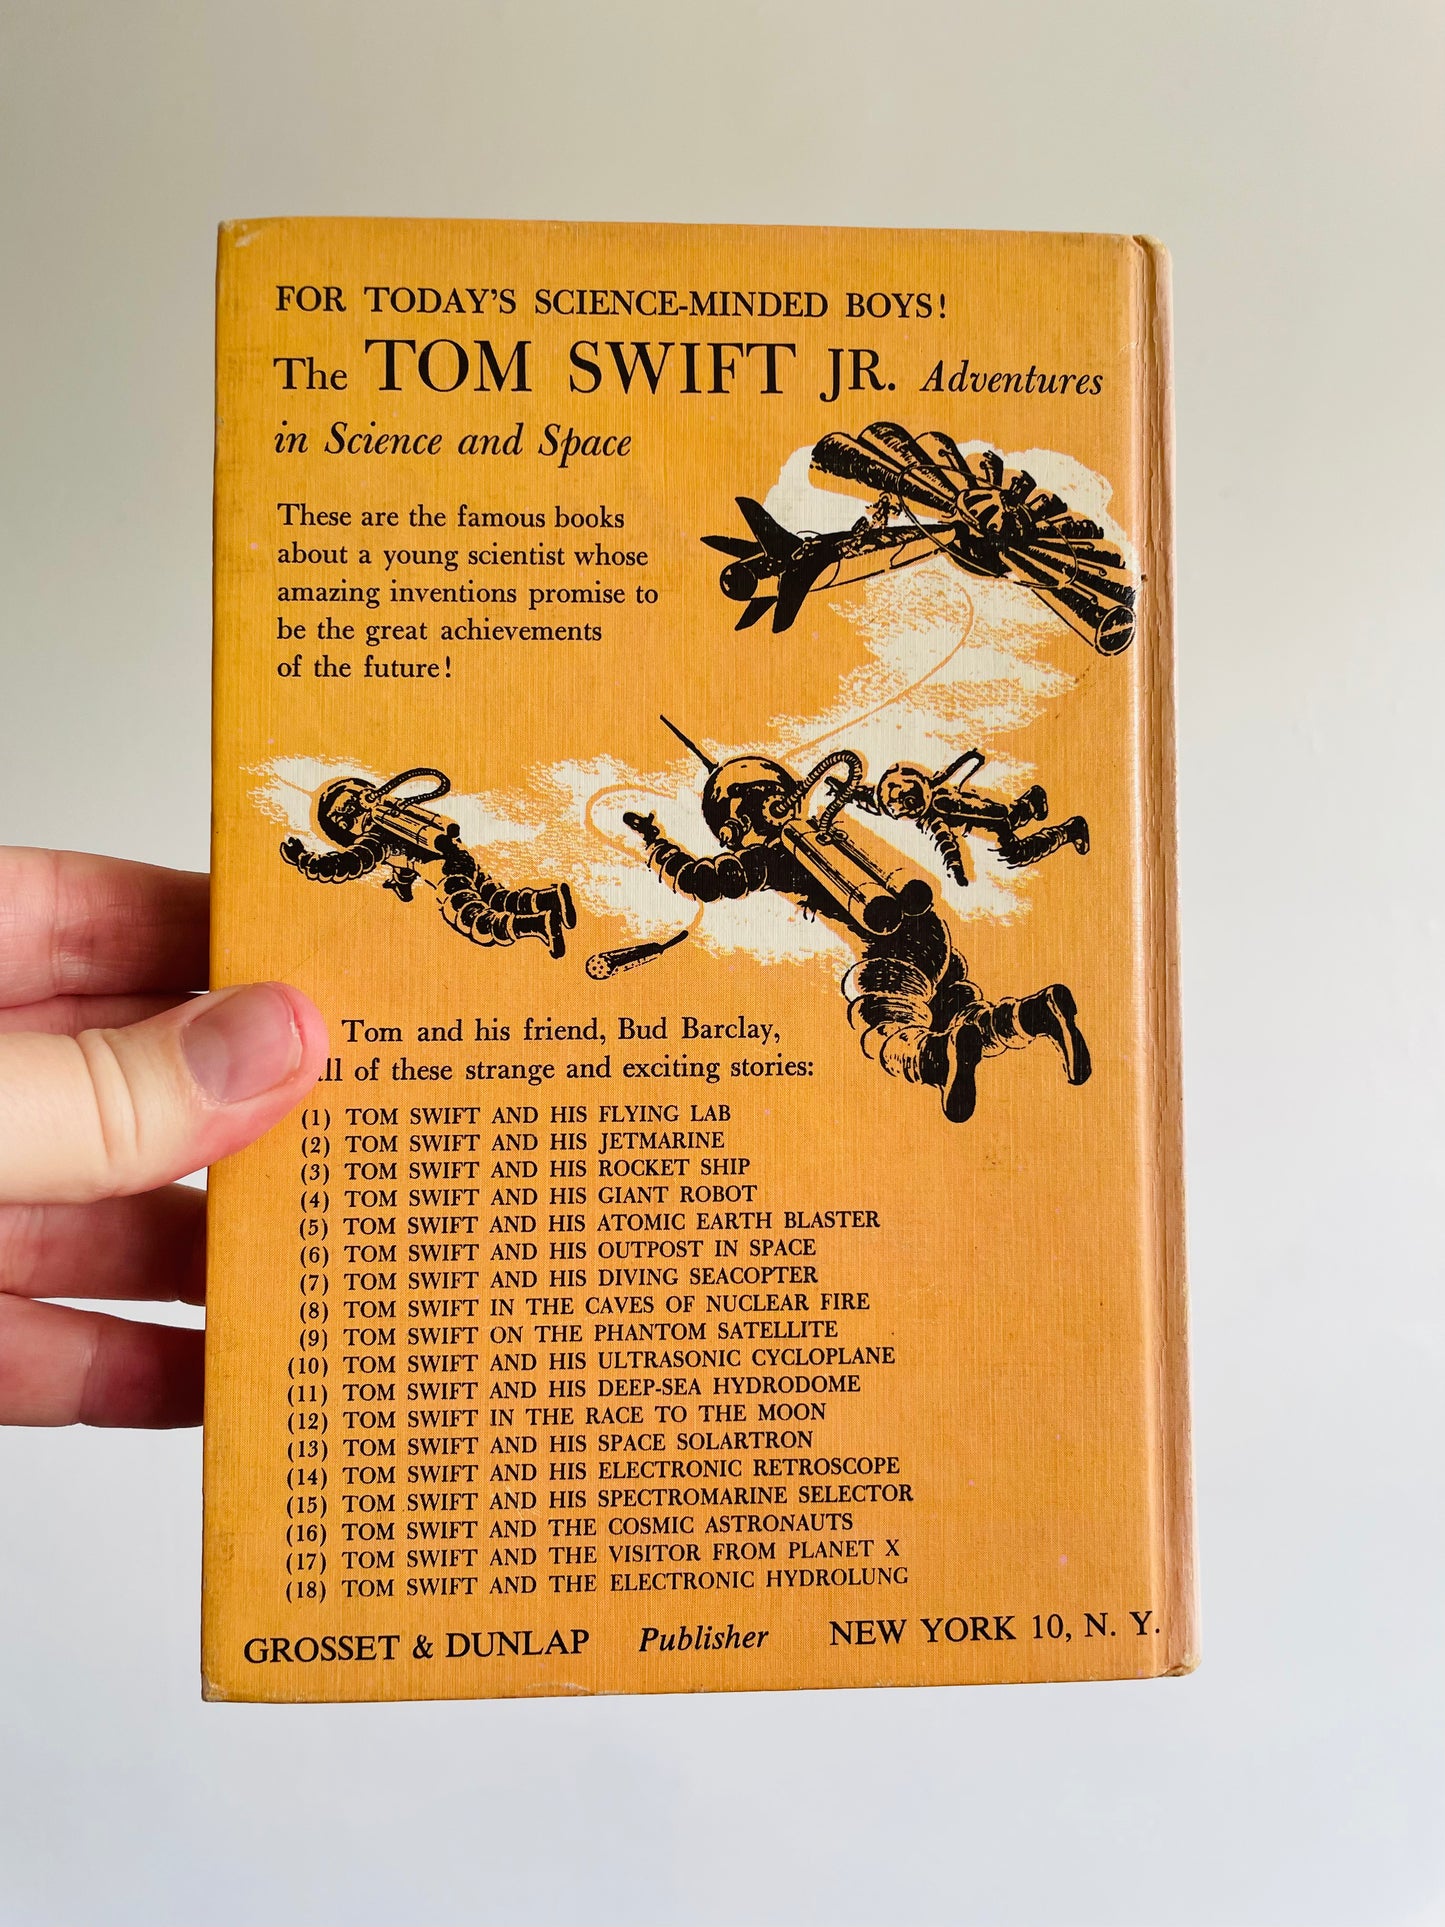 Tom Swift and His Triphibian Atomicar Hardcover Book by Victor Appleton II (1962)